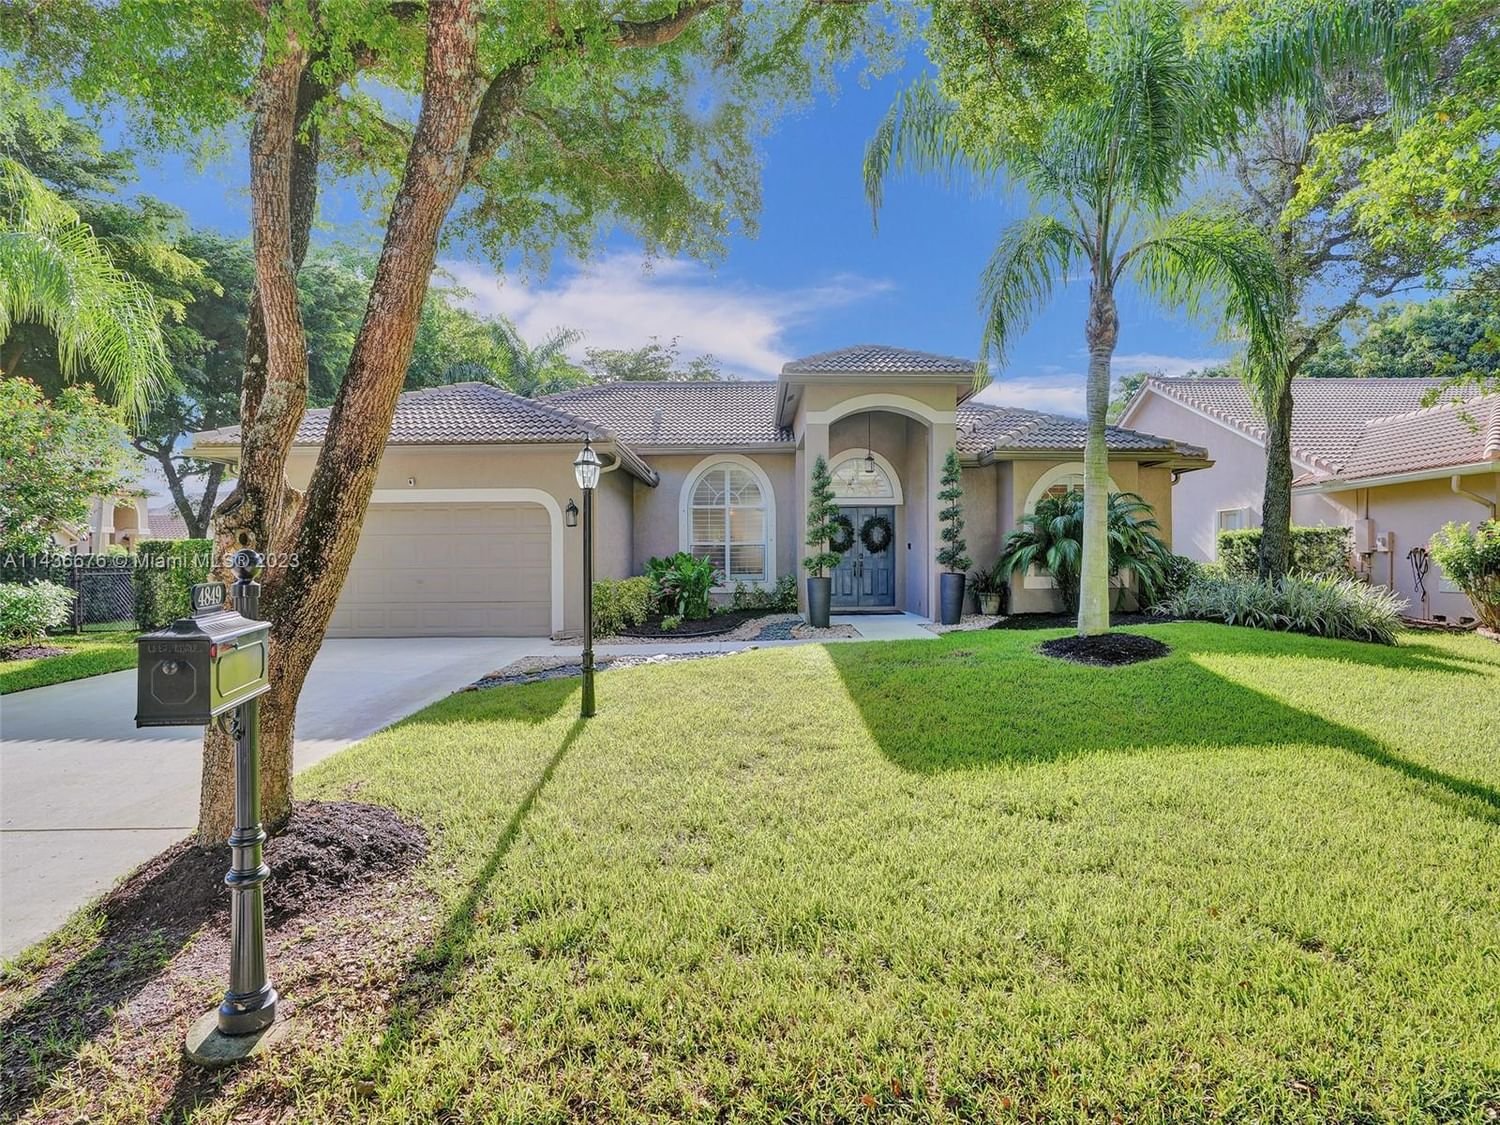 Real estate property located at 4849 Chardonnay Dr, Broward County, Coral Springs, FL